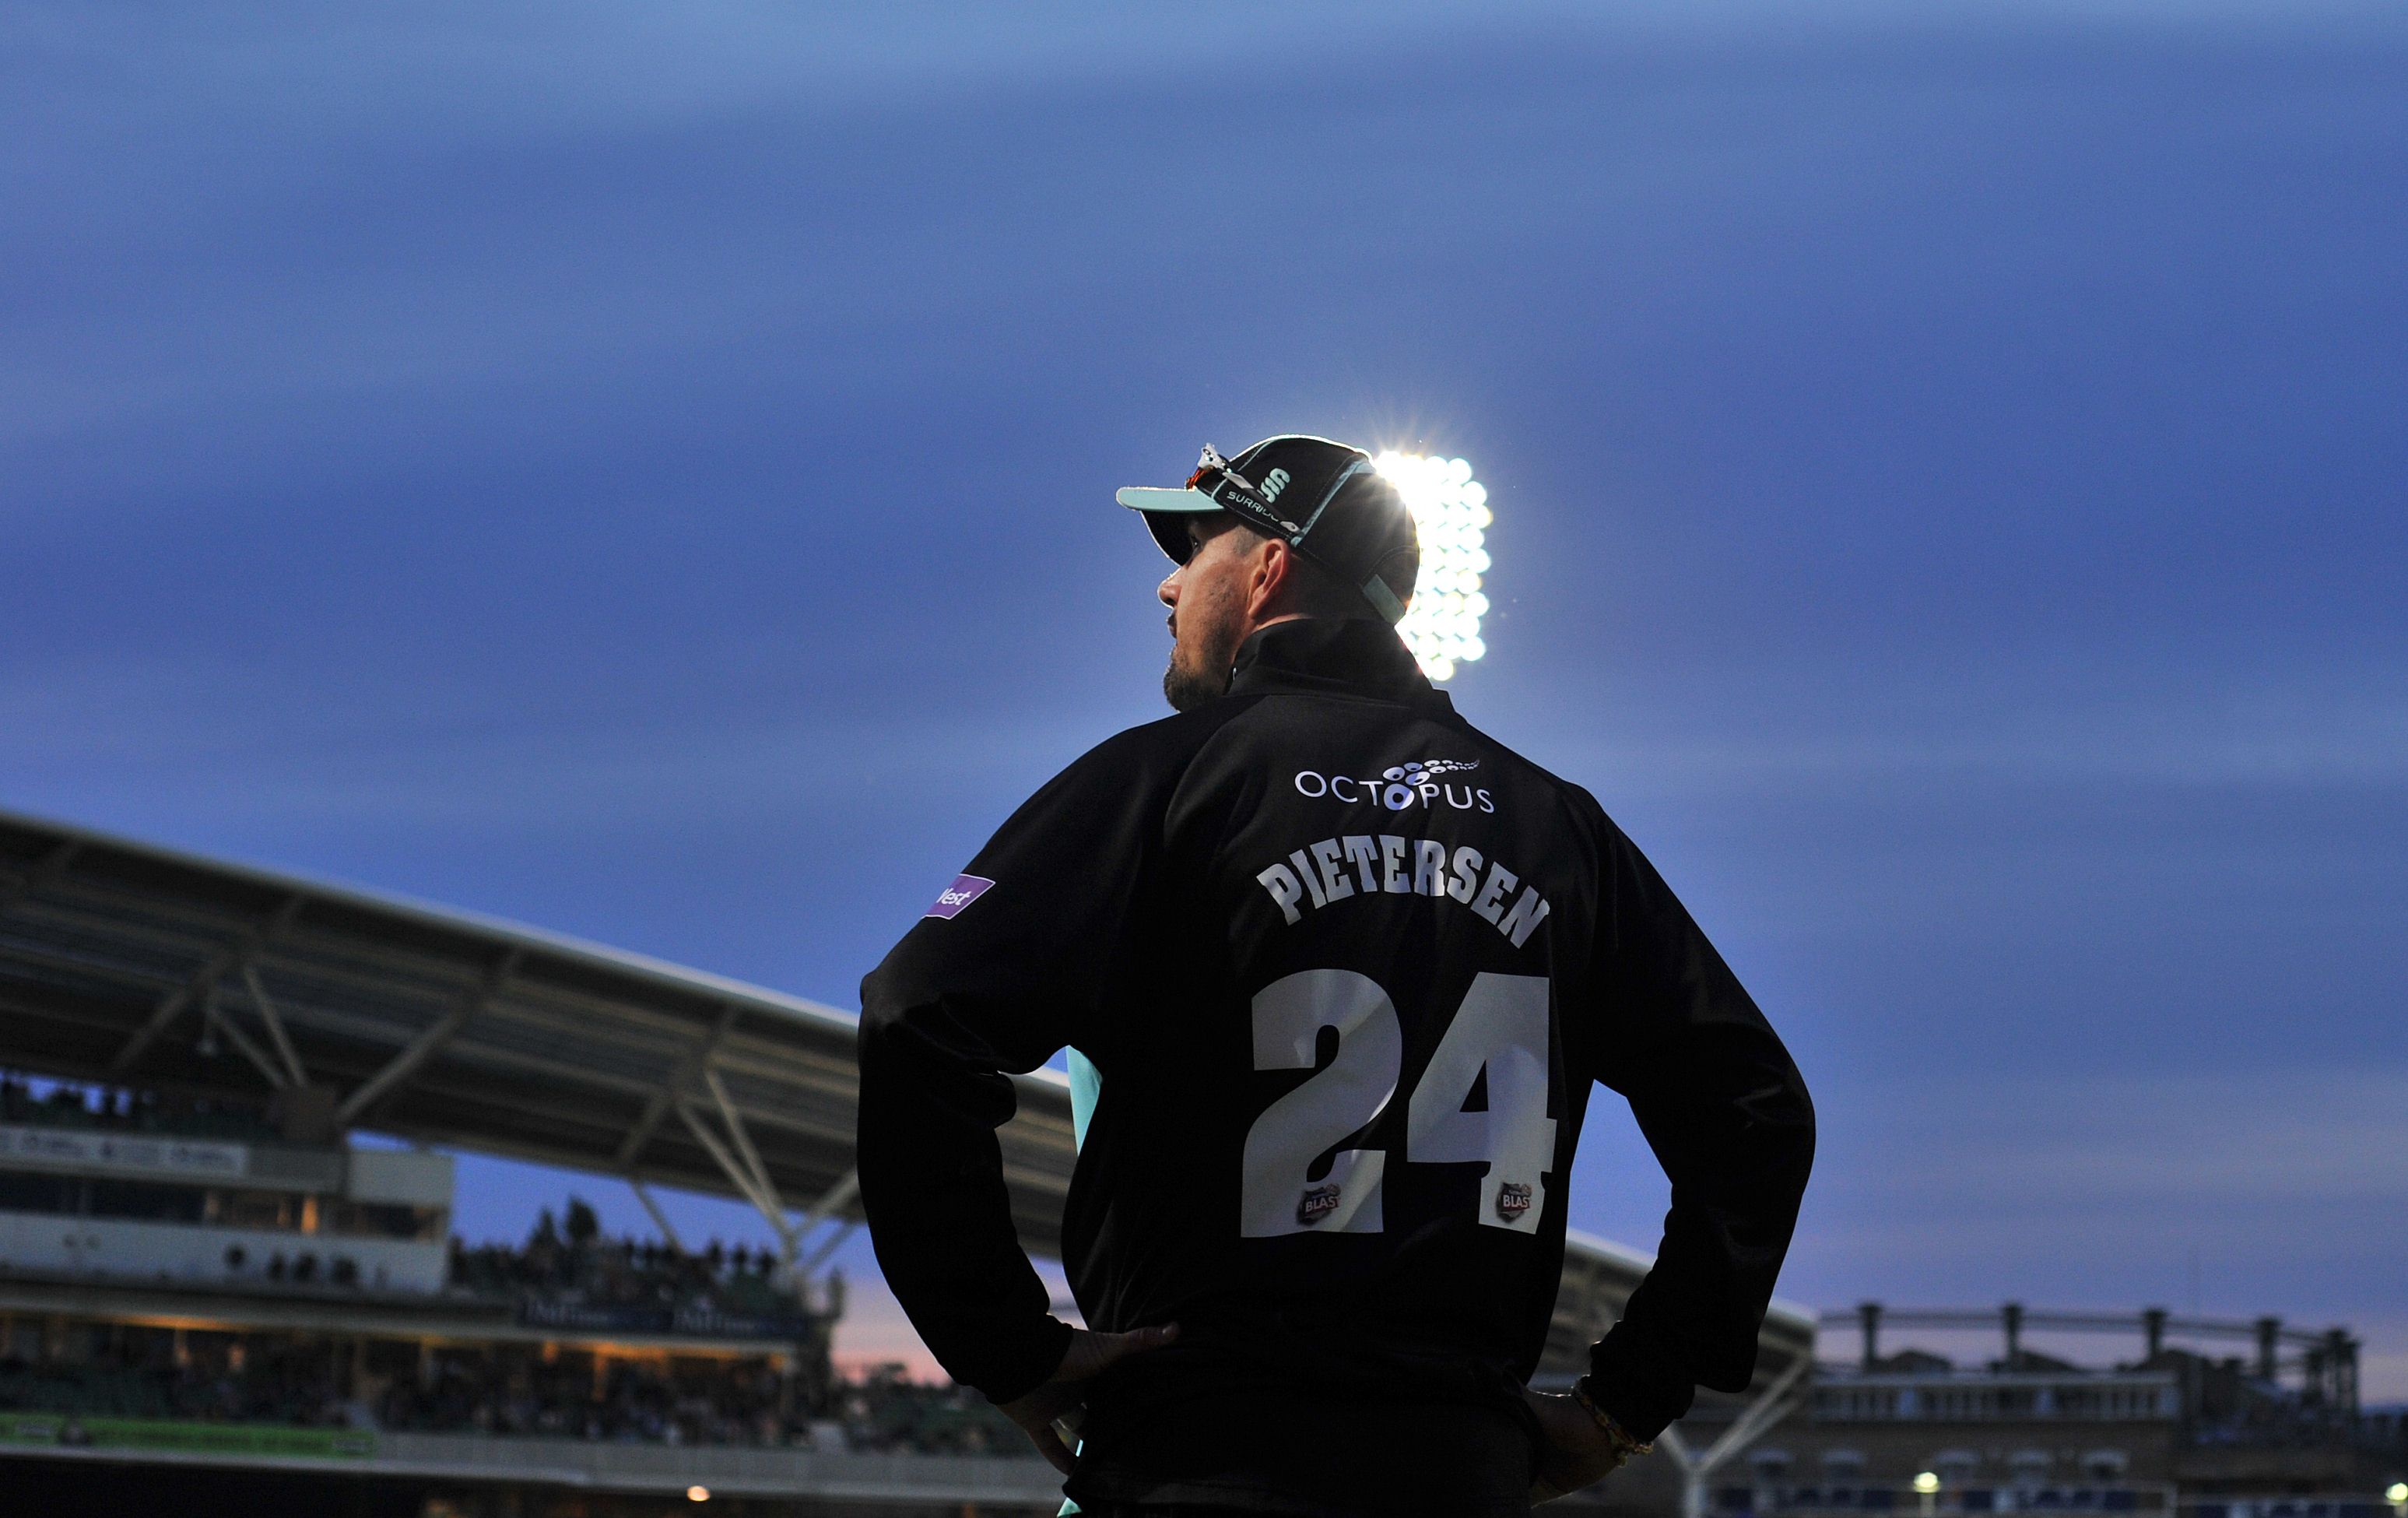 Kevin Pietersen was sacked from the England team last year. Photo: AFP